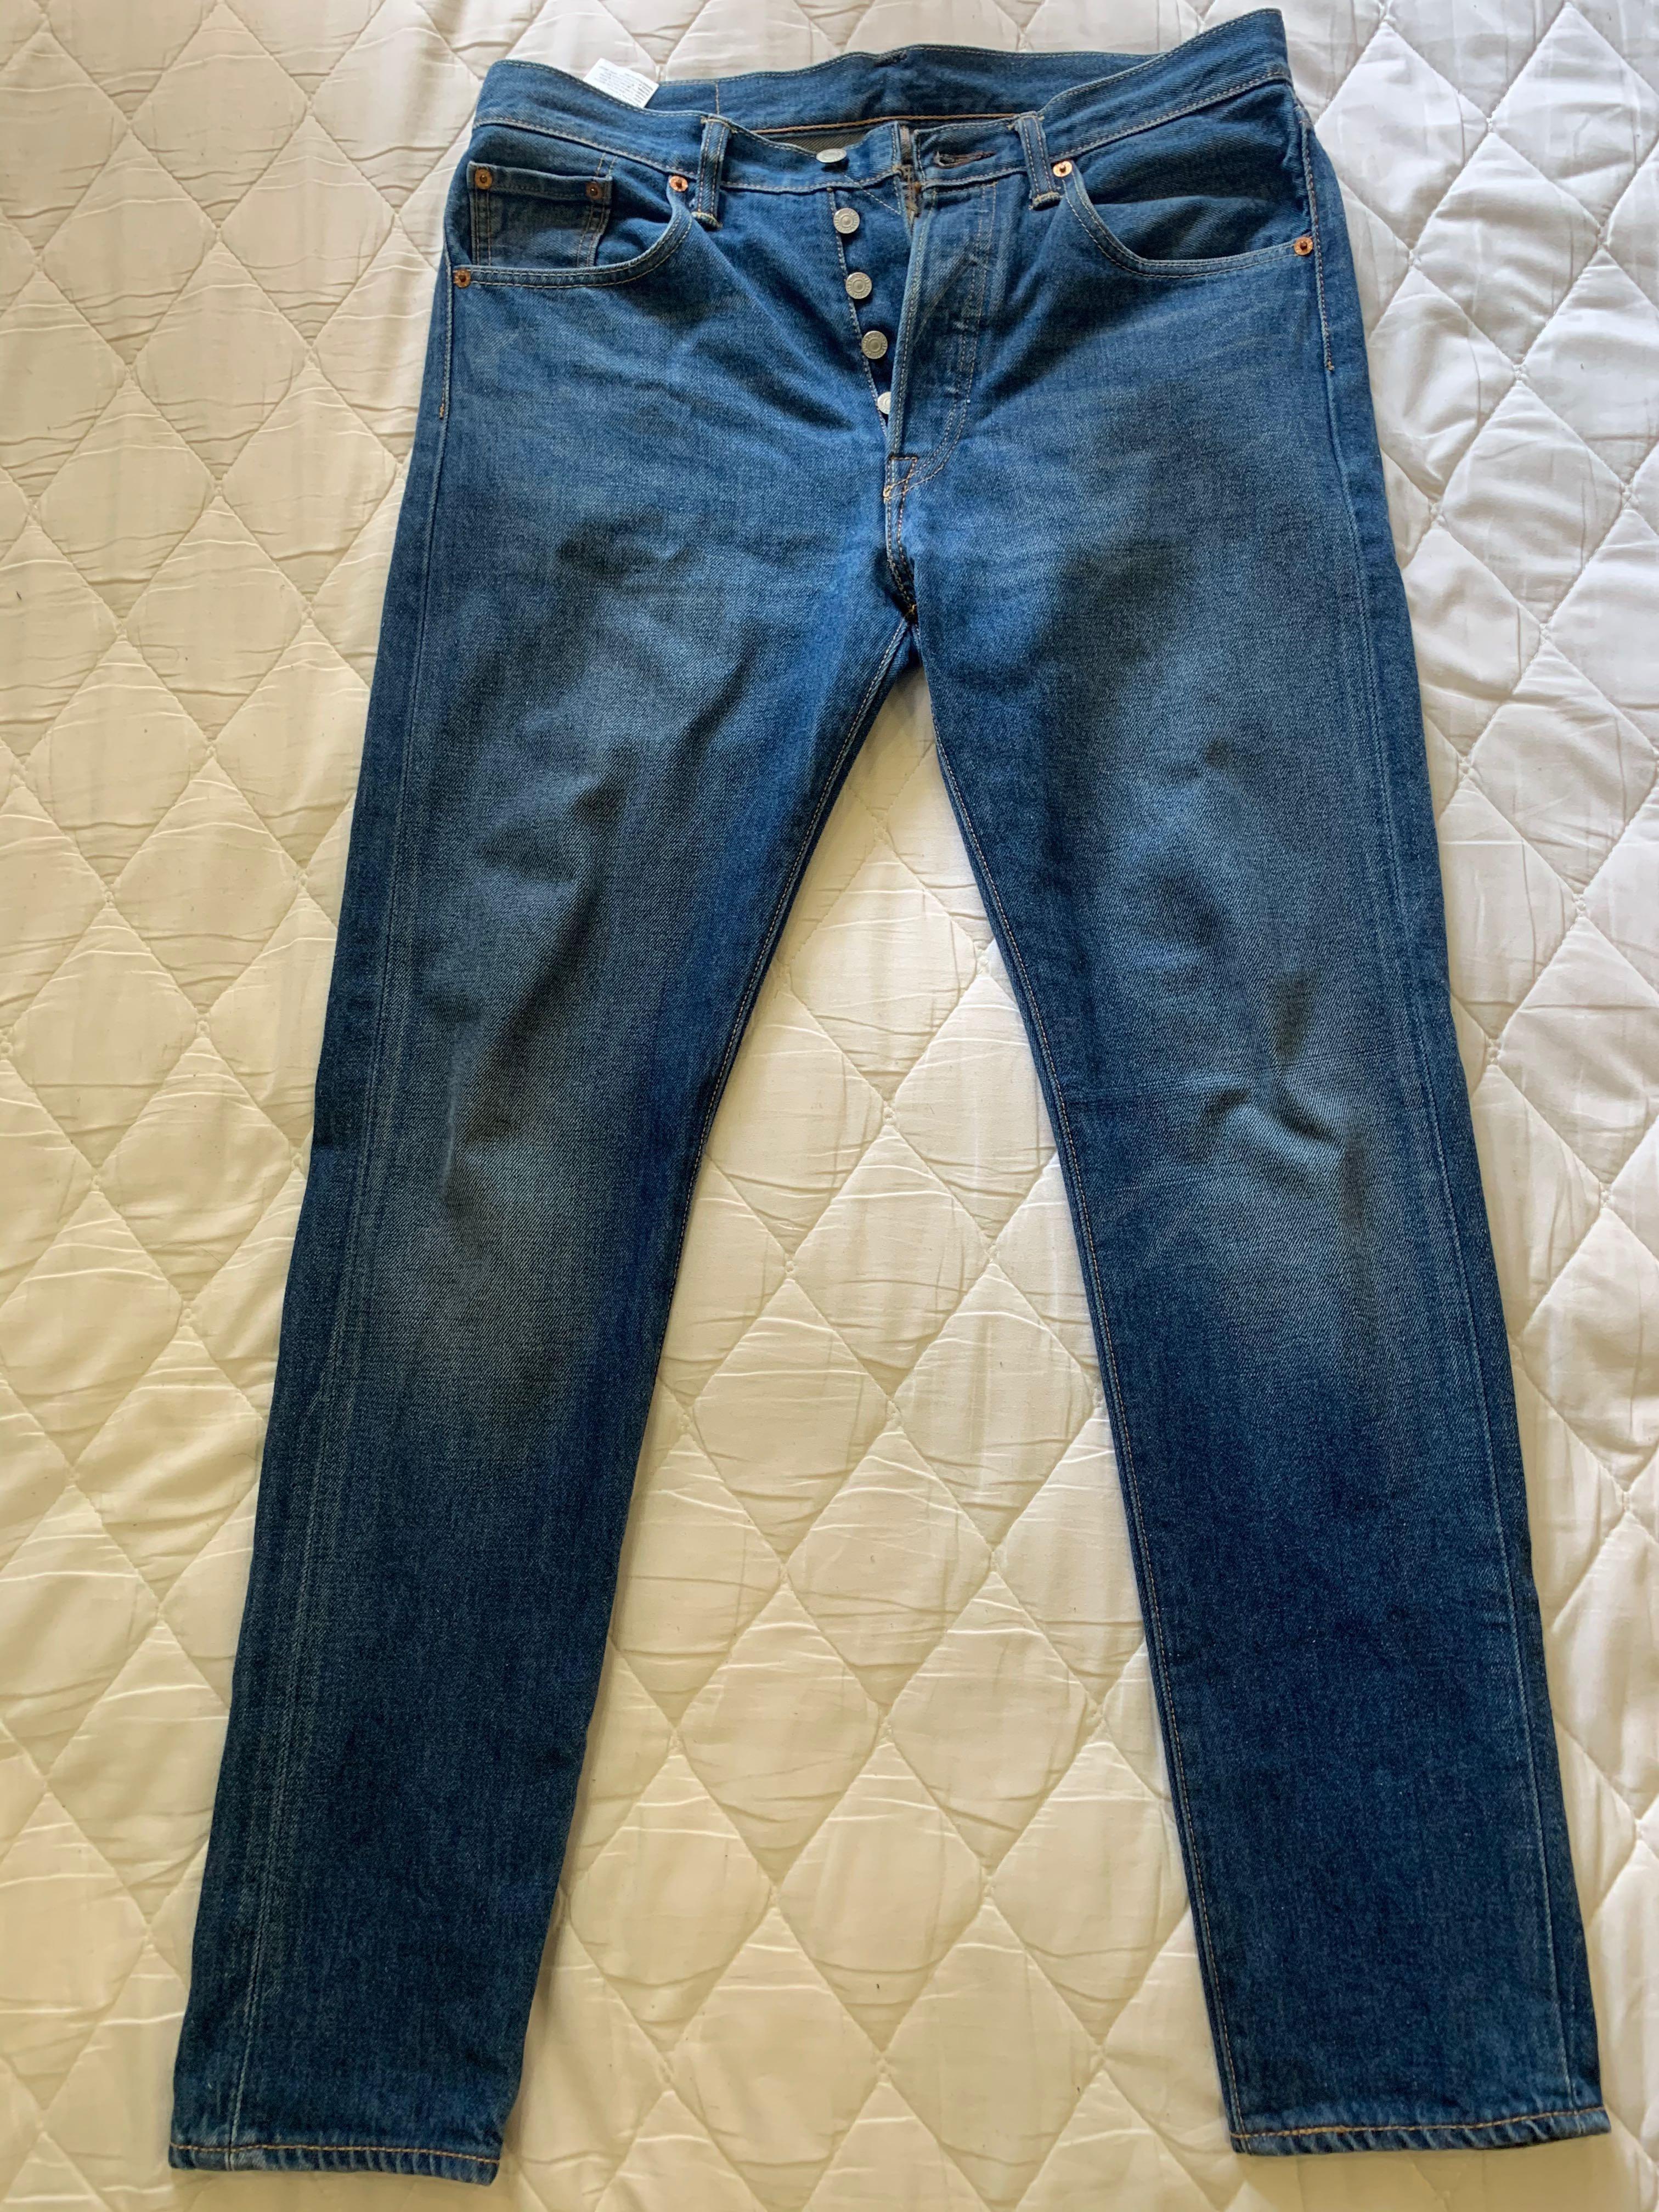 Levis 501 Ct Size 30 Men S Fashion Clothes Bottoms On Carousell